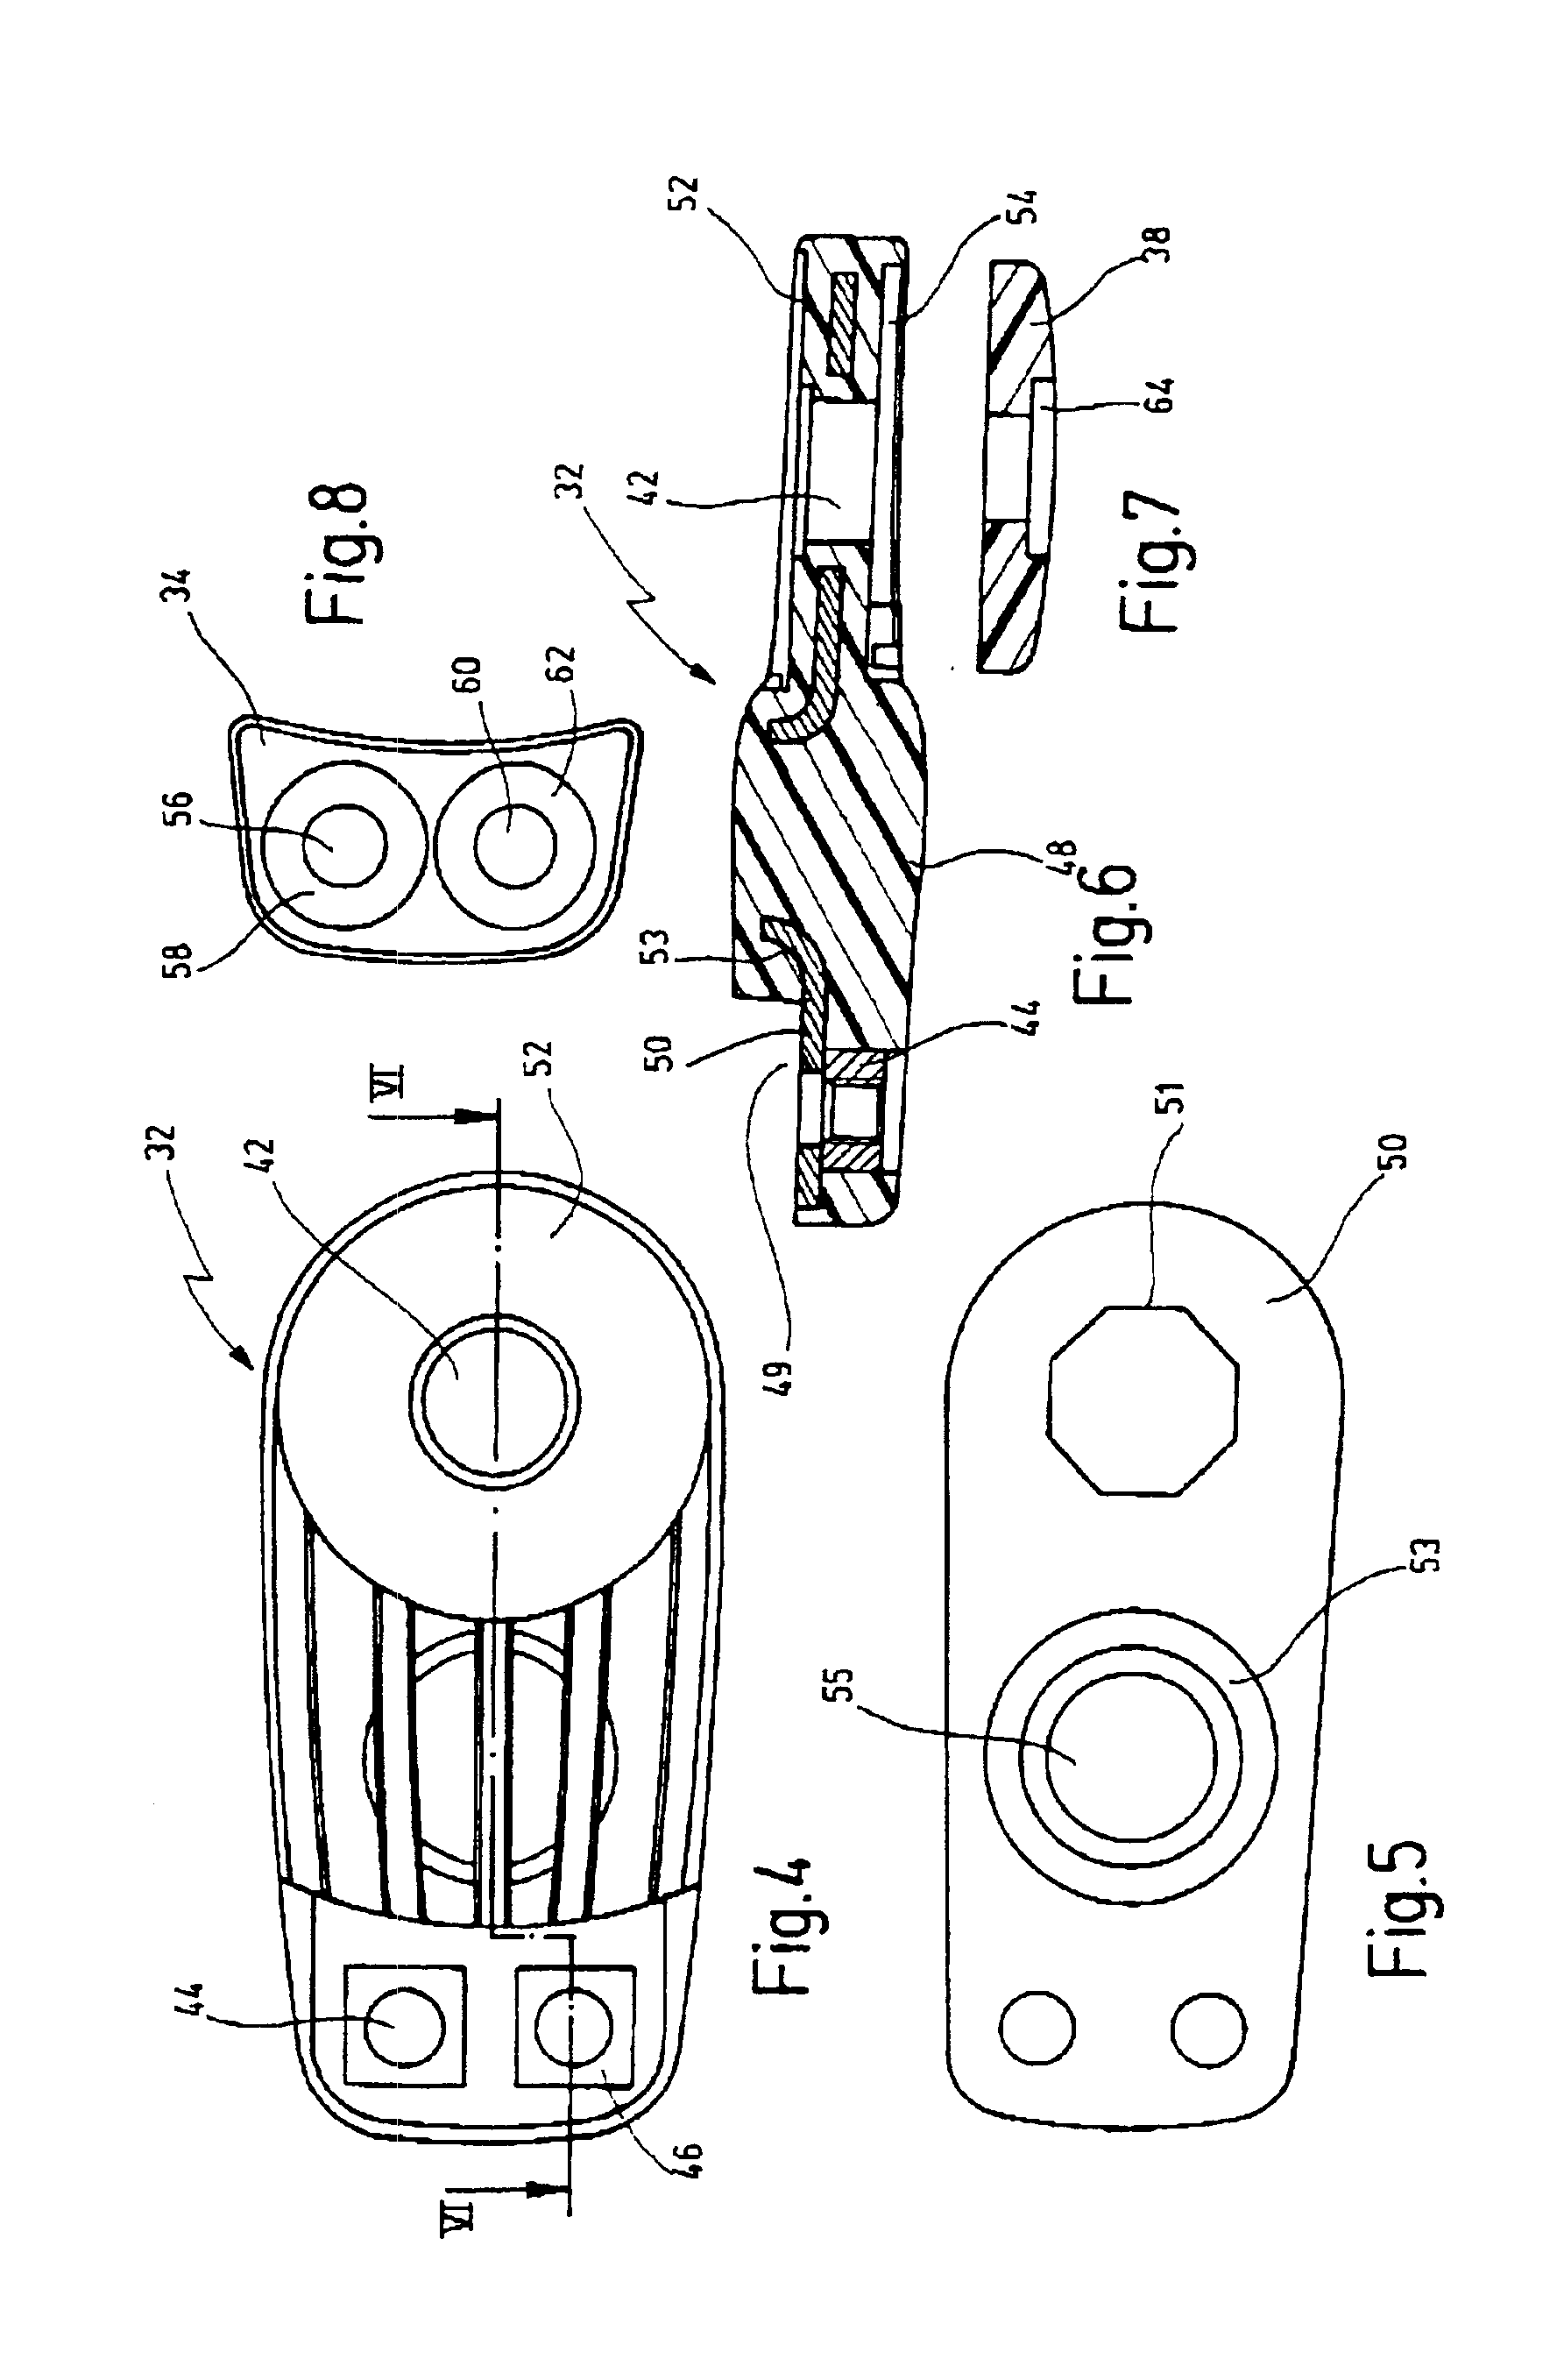 Tool having a holder for mounting on a drive shaft